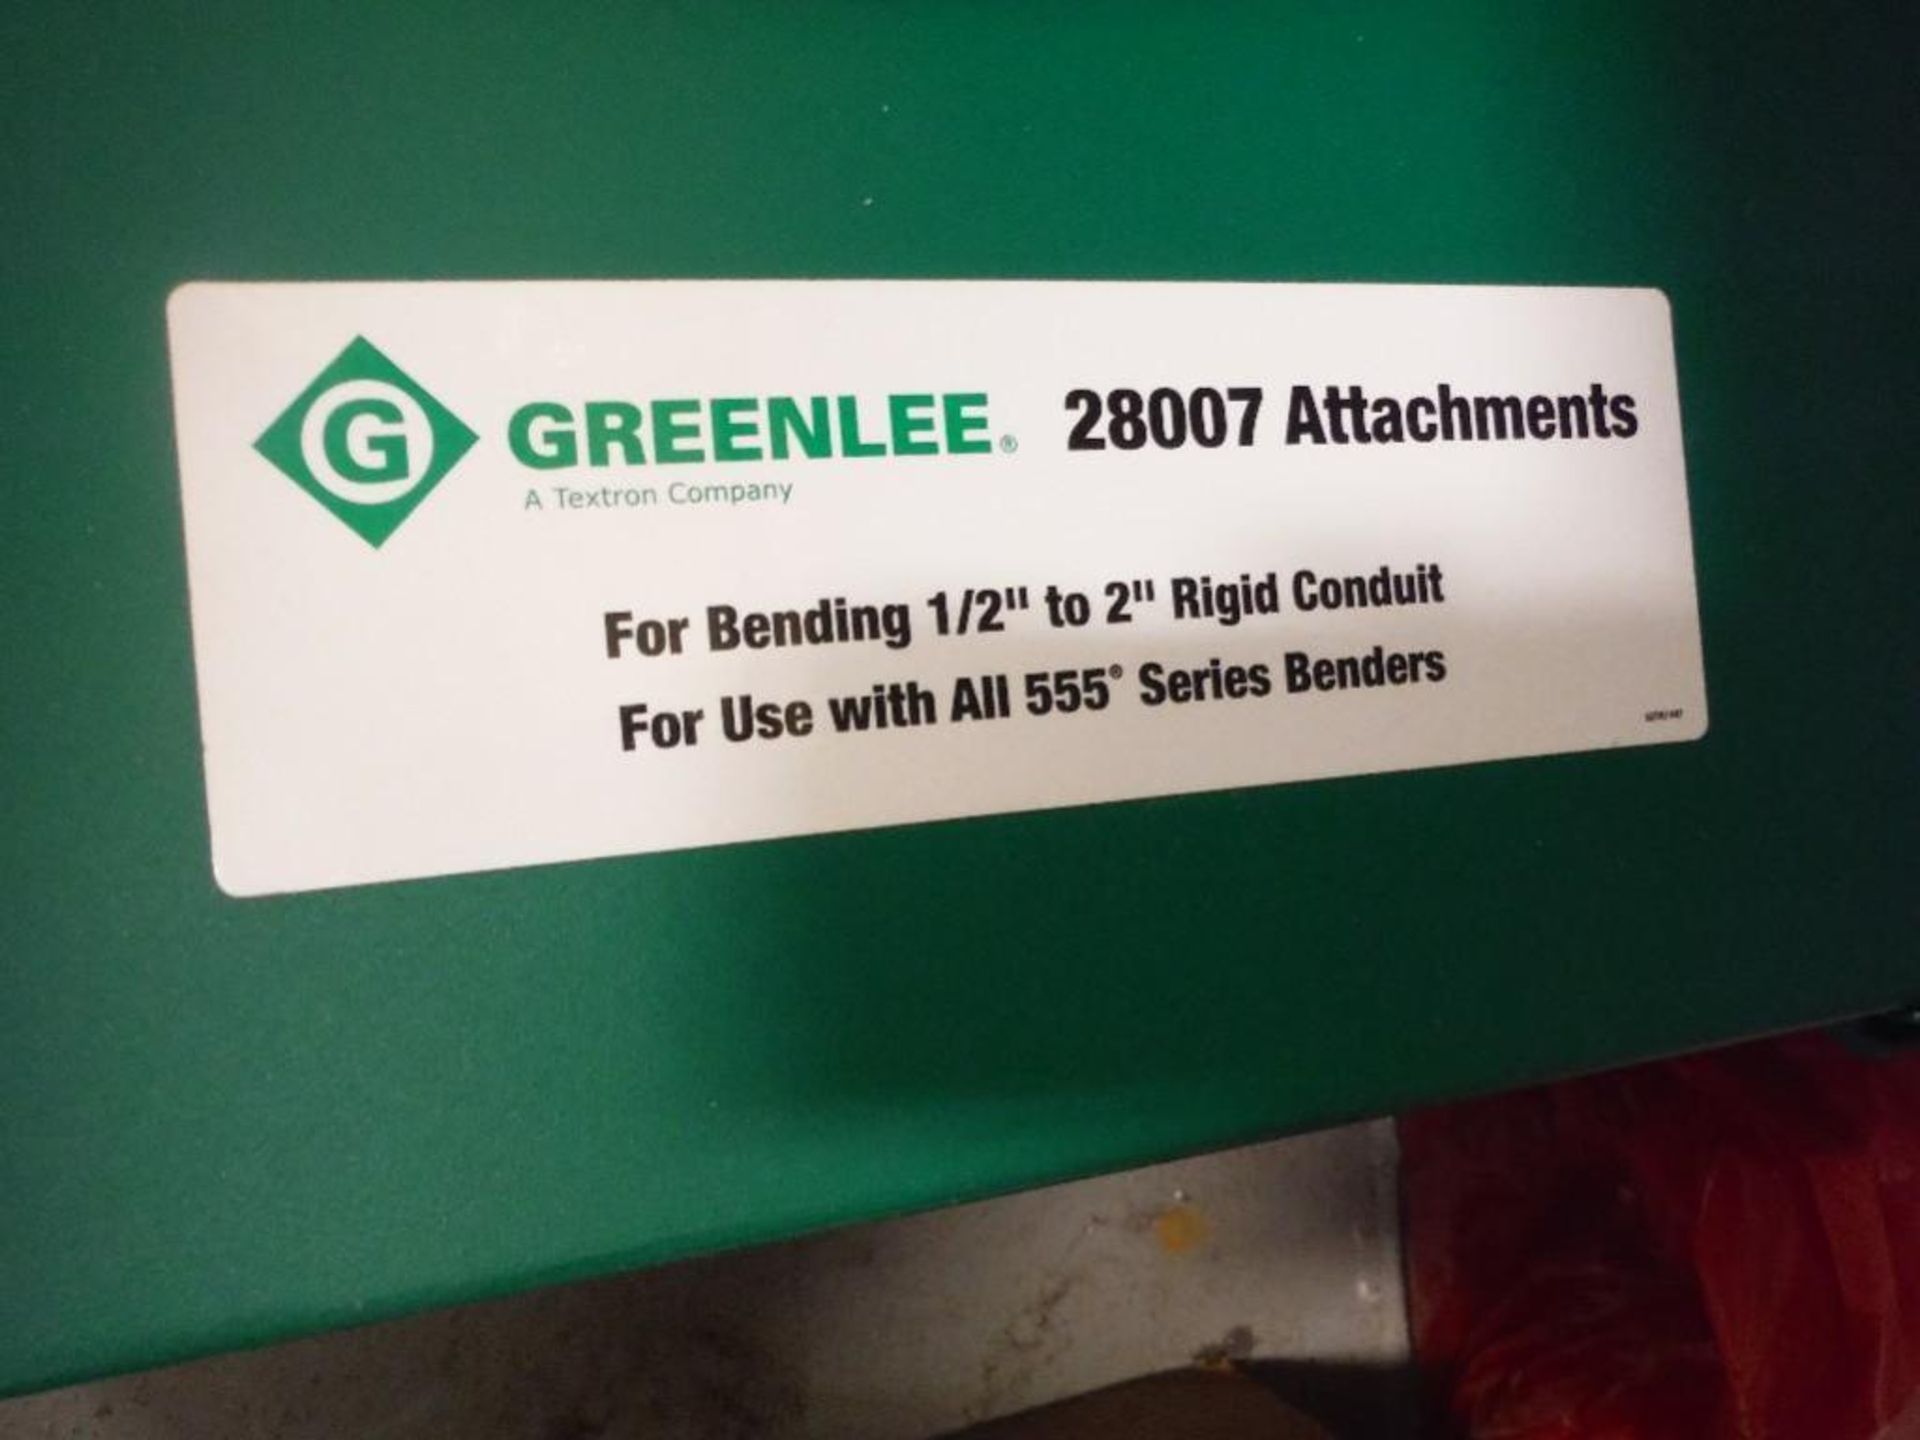 Greenlee 555C electric pipe bender for 1/2 in. to 2 in. conduit, SN AFB5513GQ with 1/2 to 2 in. rigi - Image 8 of 11